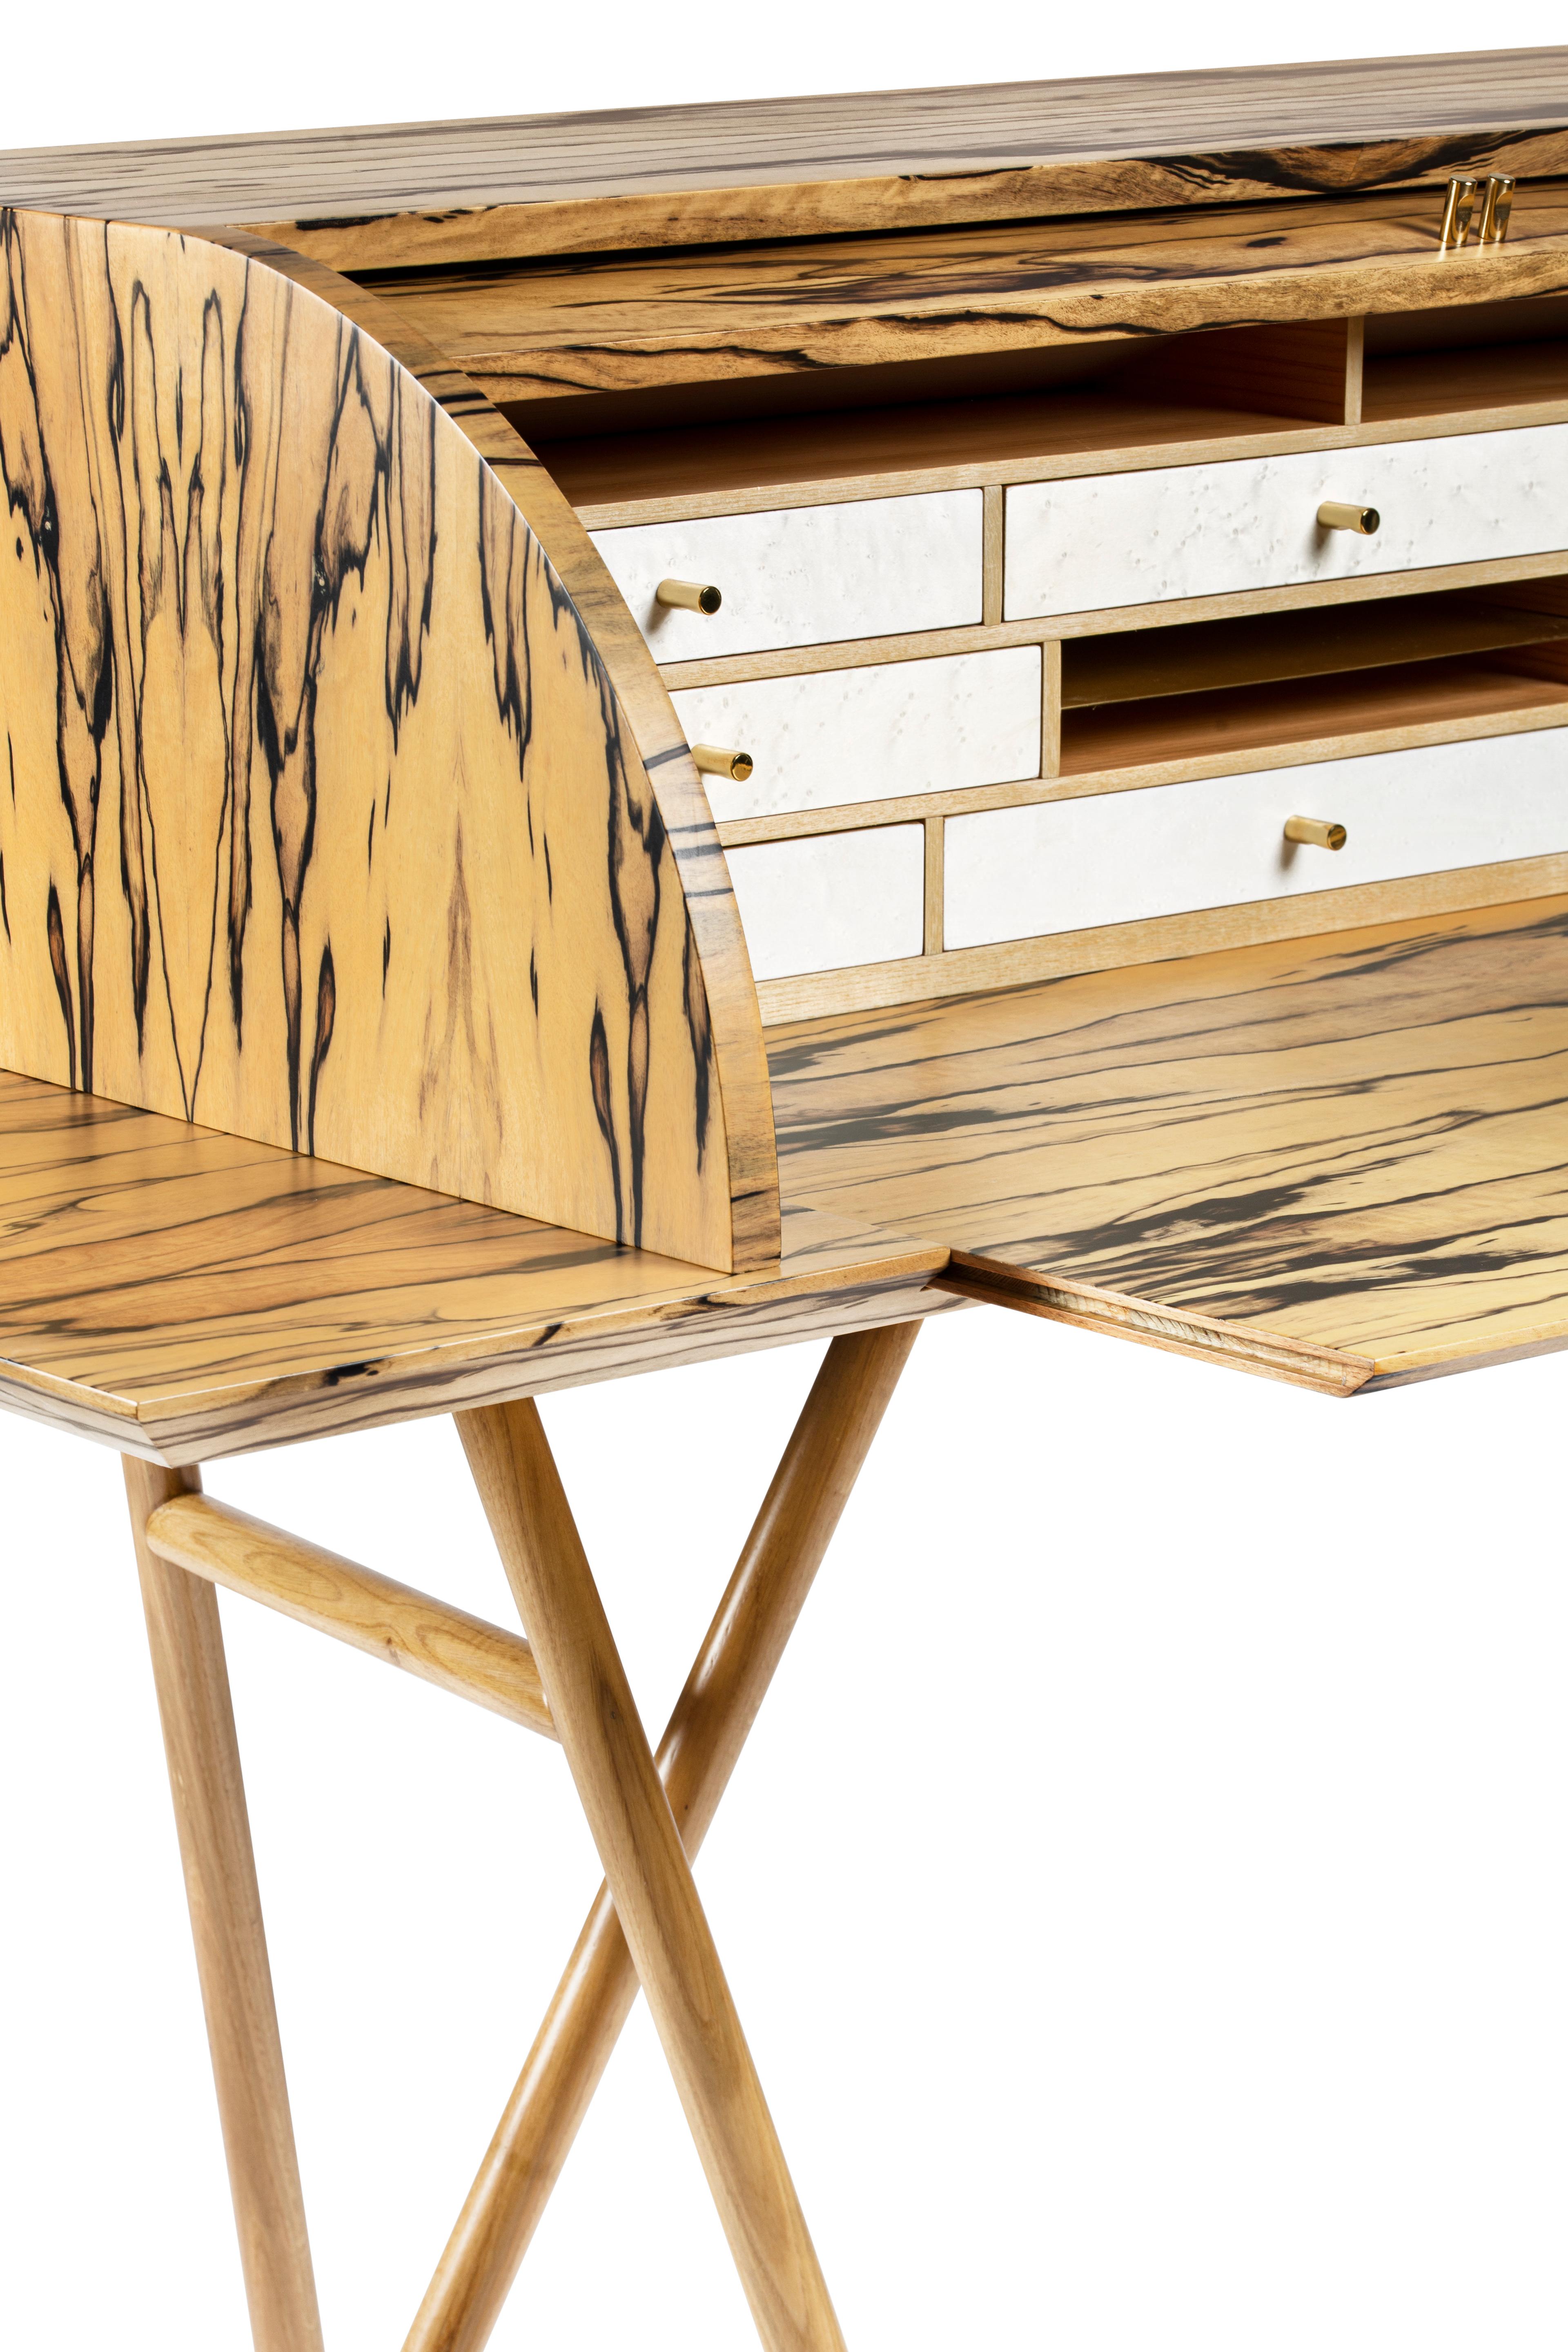 21st Century Charles Dix Desk, White Ebony, White Maple and Brass, Made in Italy In New Condition For Sale In Nocera Superiore, Campania